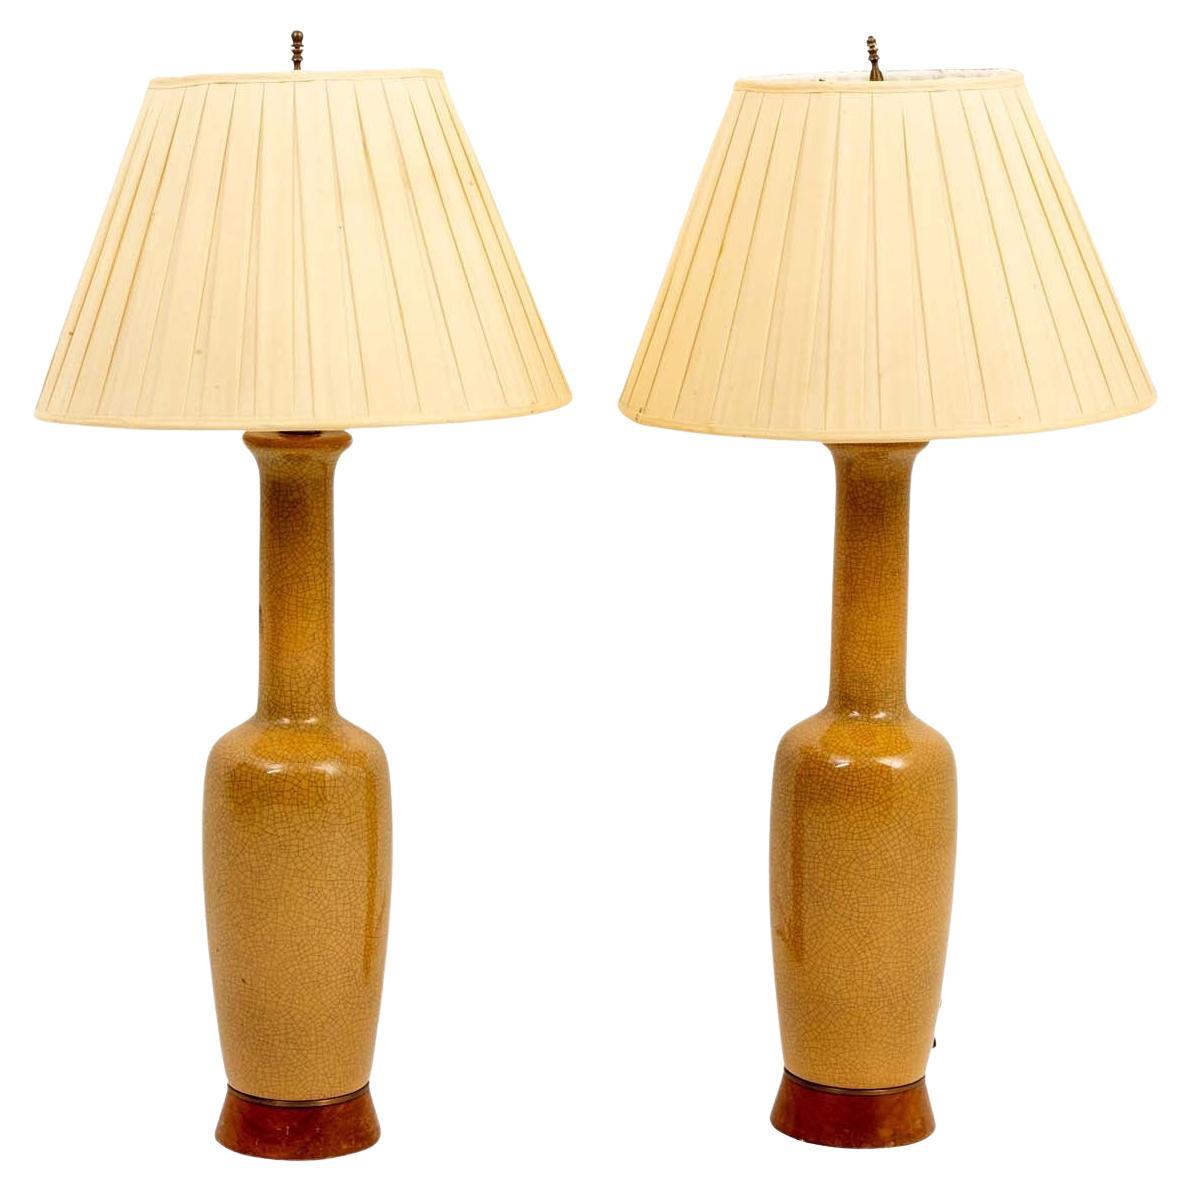 Pair of Mid Century Crackled Porcelain Lamps